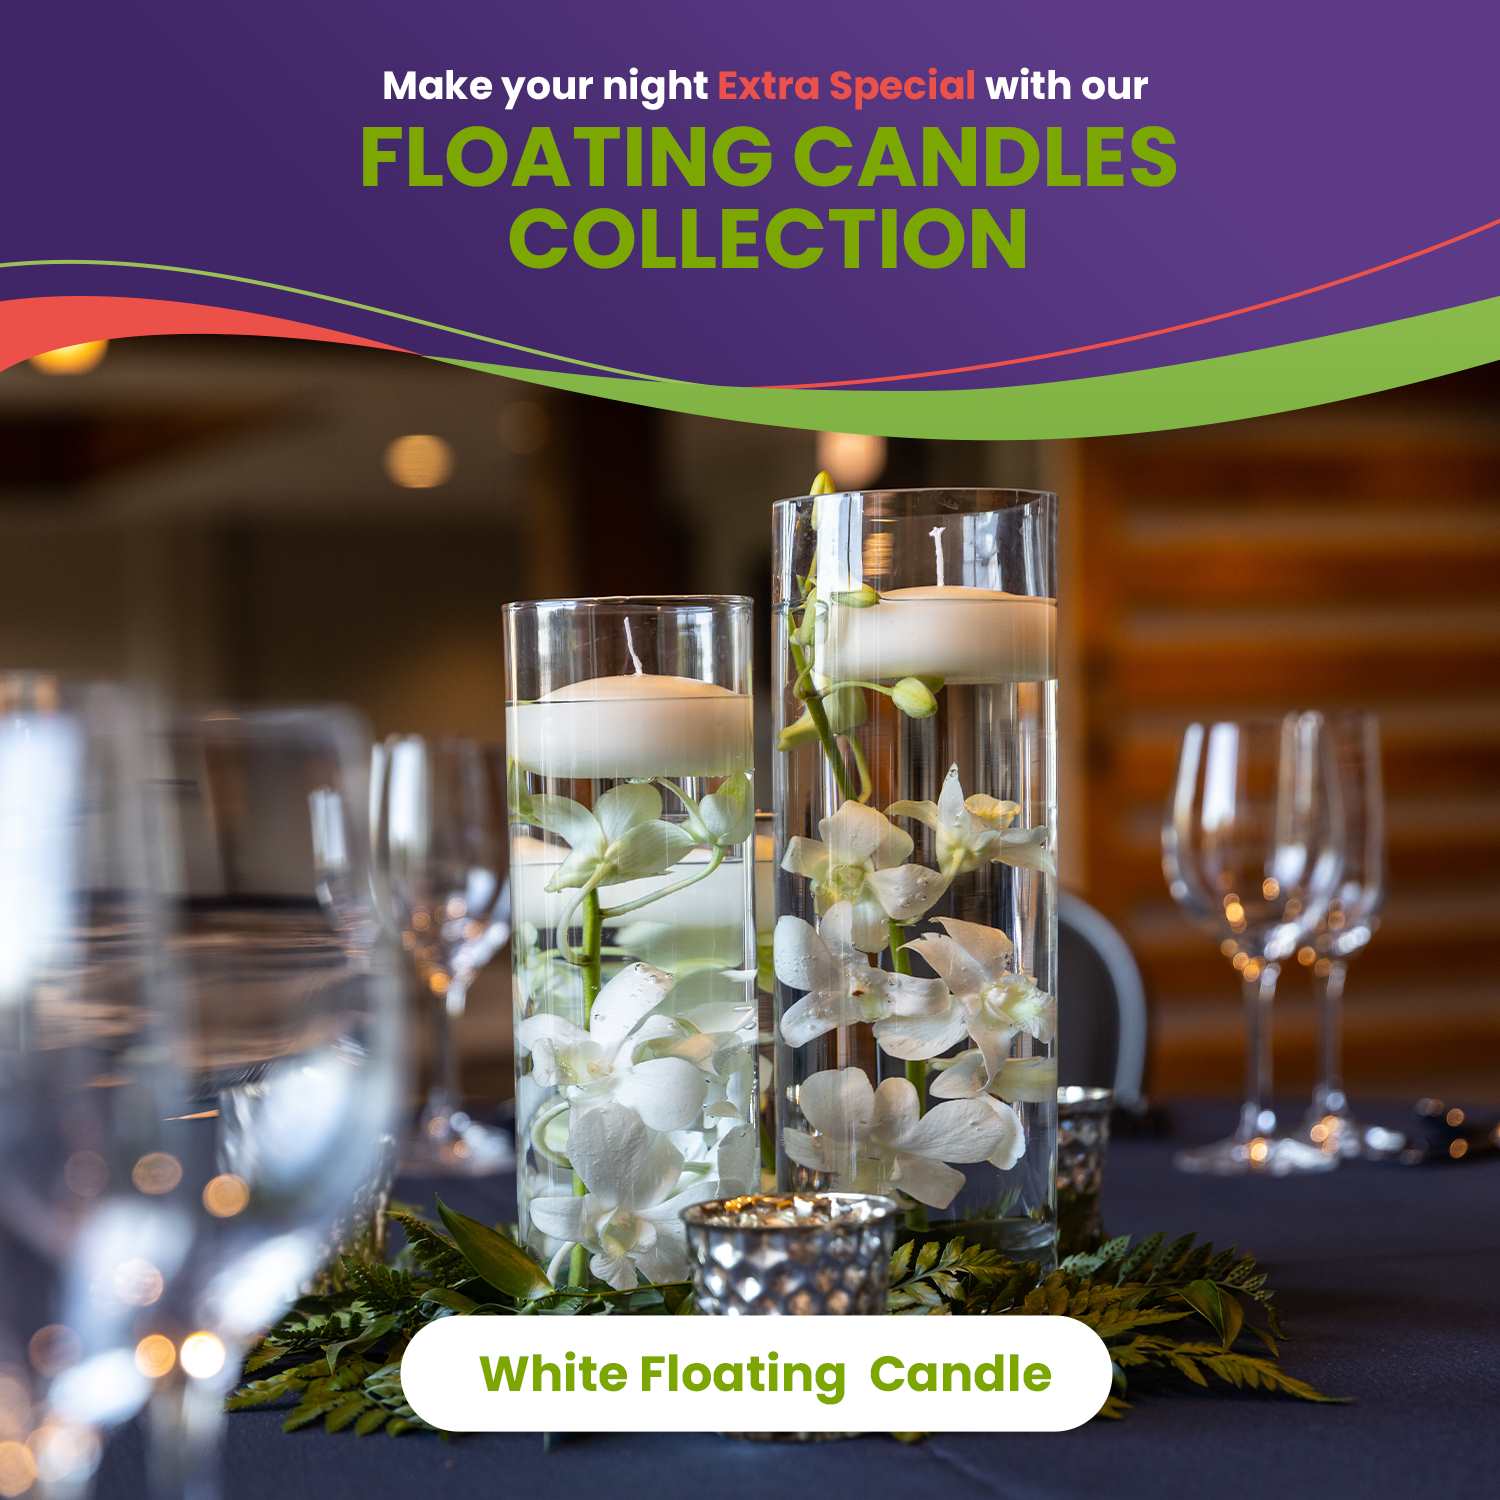 White Floating Candles - 16-Pack - 8 Hours Burn Time